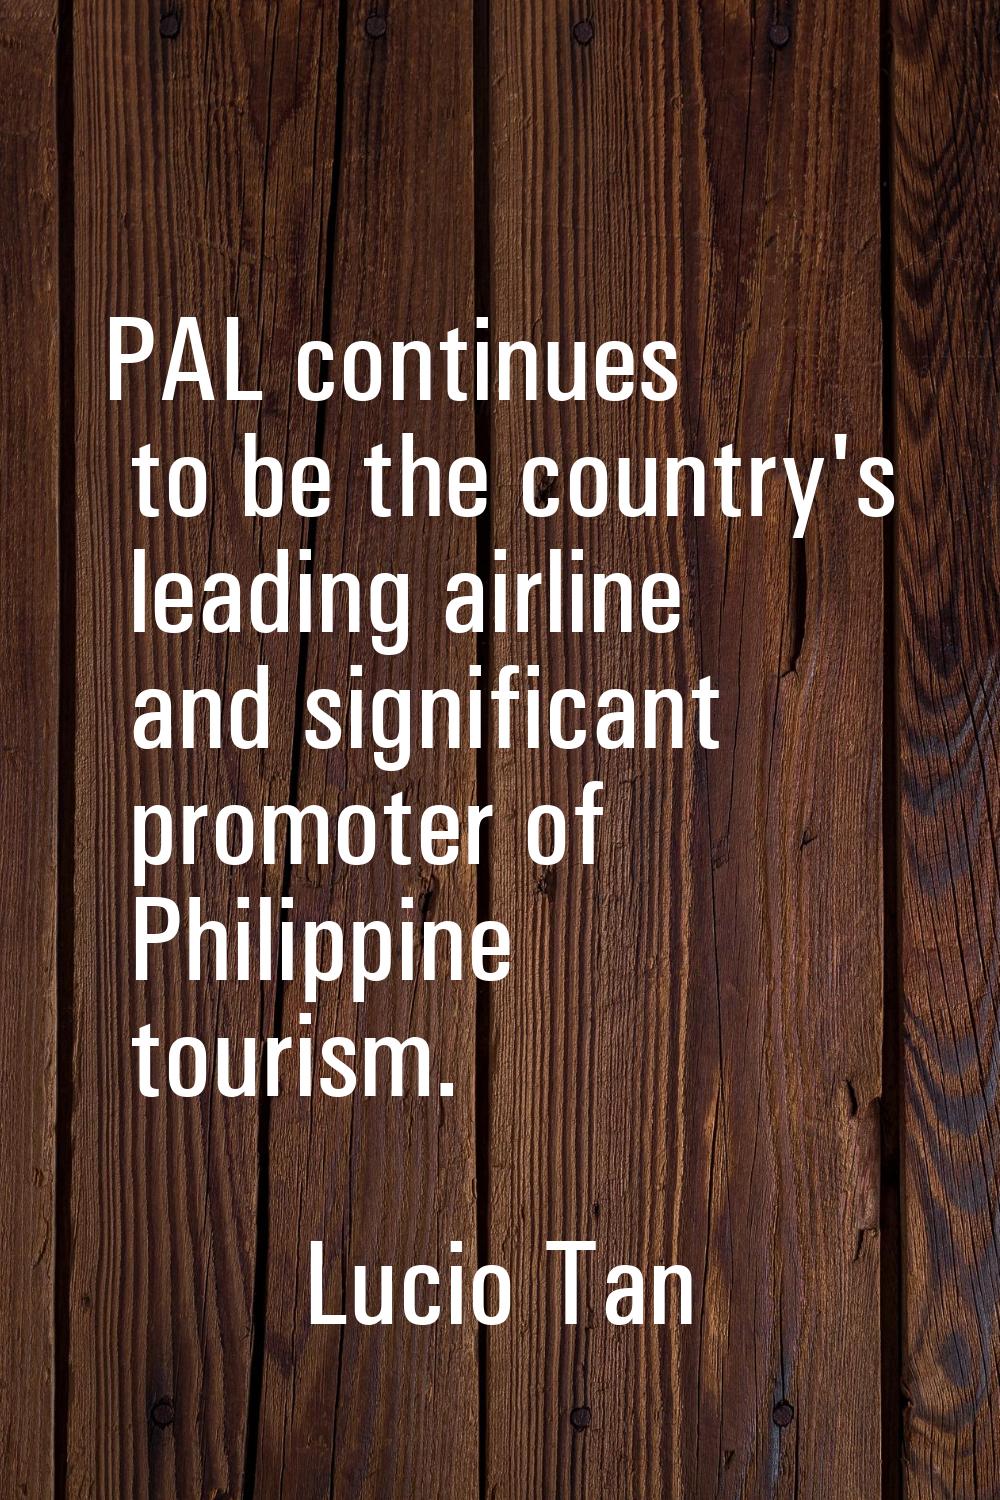 PAL continues to be the country's leading airline and significant promoter of Philippine tourism.